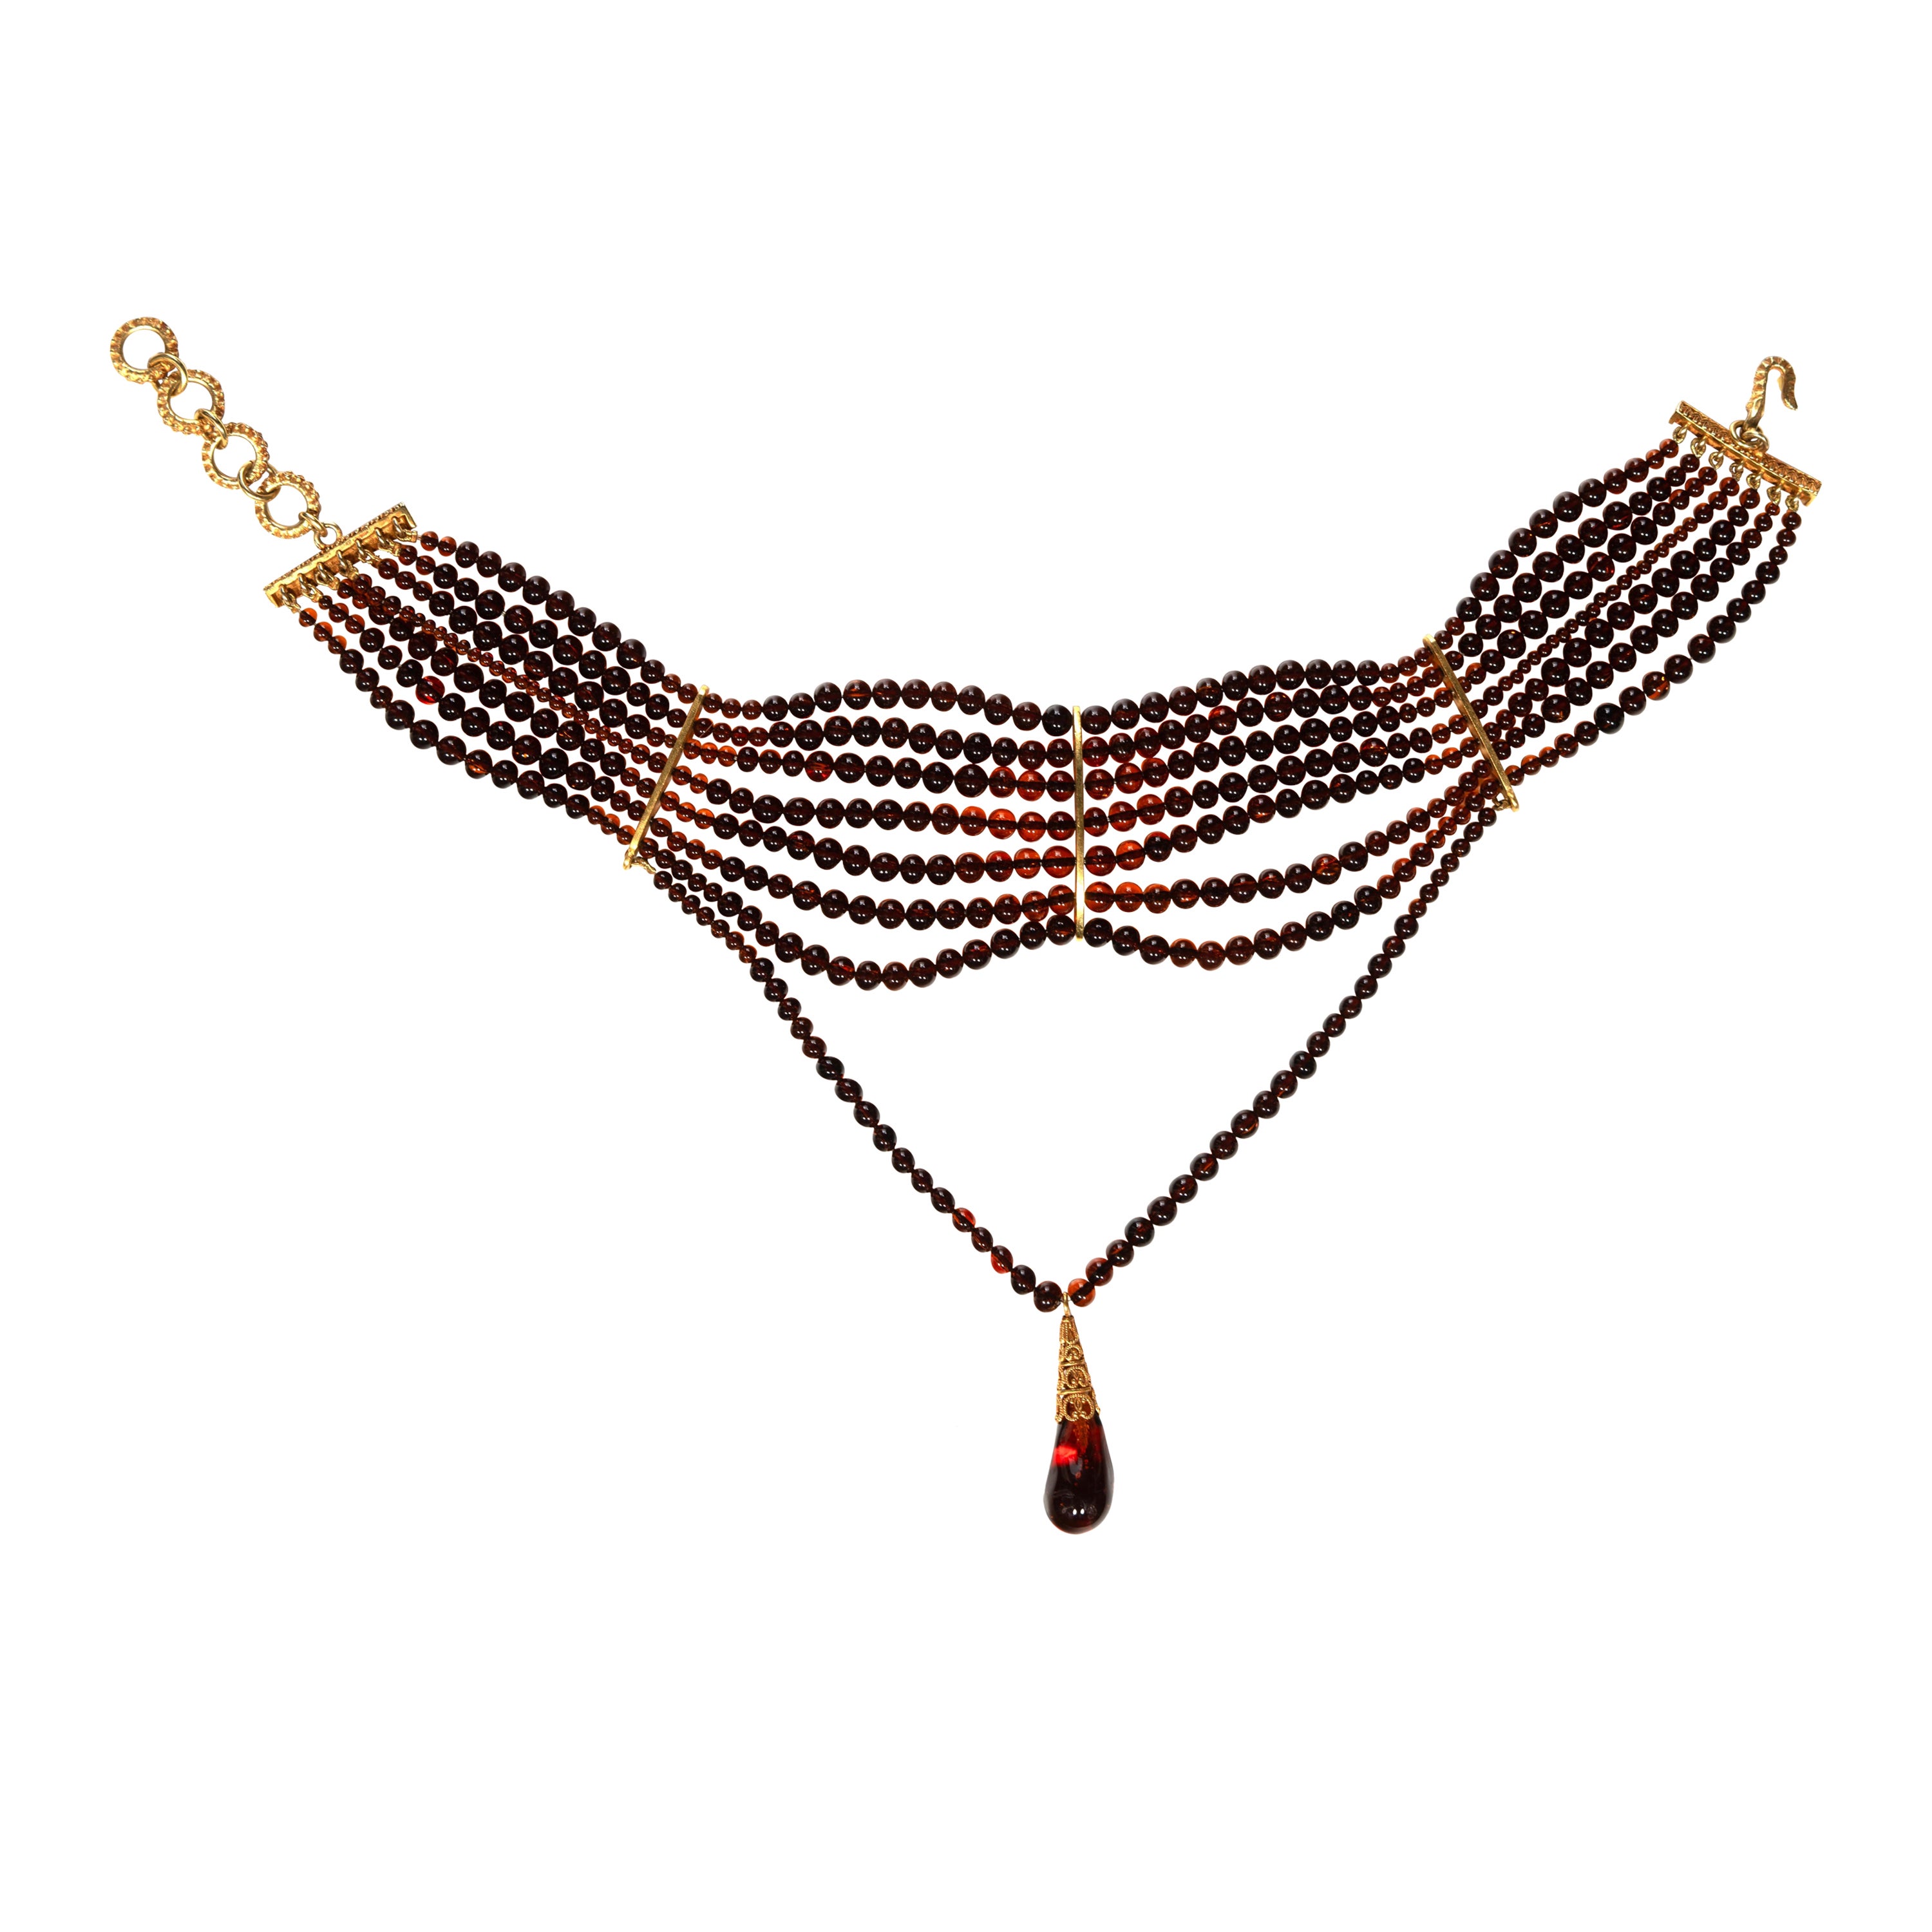 Christian Dior by John Galliano Amber Glass Bead Choker Necklace, c. 1998 For Sale